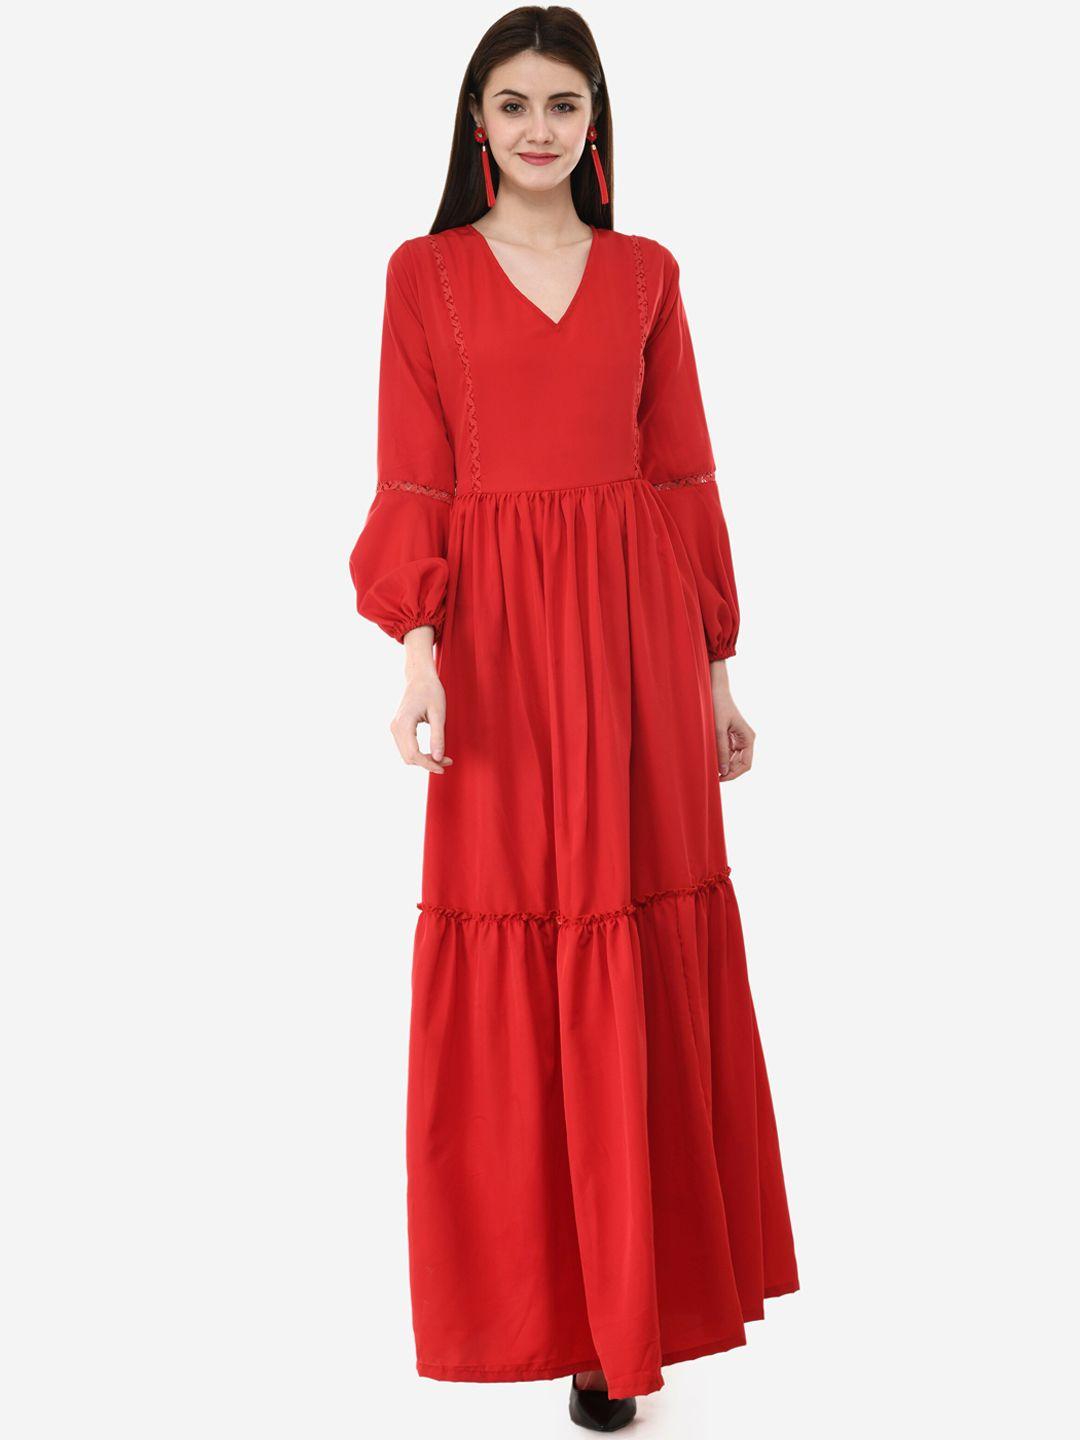 v&m women red solid maxi dress